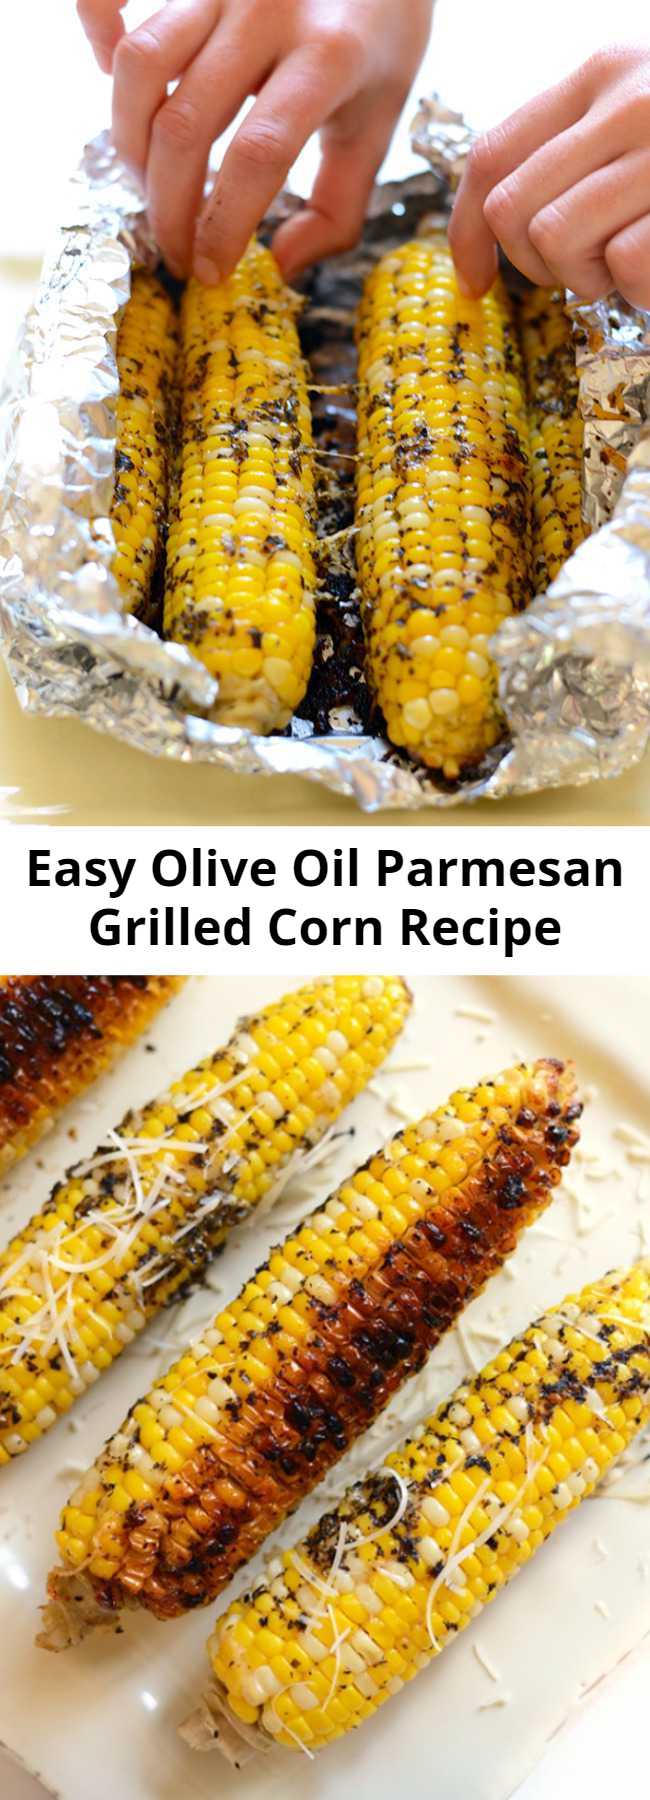 Easy Olive Oil Parmesan Grilled Corn Recipe - This grilled corn on the cob isn’t your average summertime side. Spice up this recipe with olive oil and parmesan cheese for the most flavorful, EASY summertime corn on the cob that can be made right on your grill!